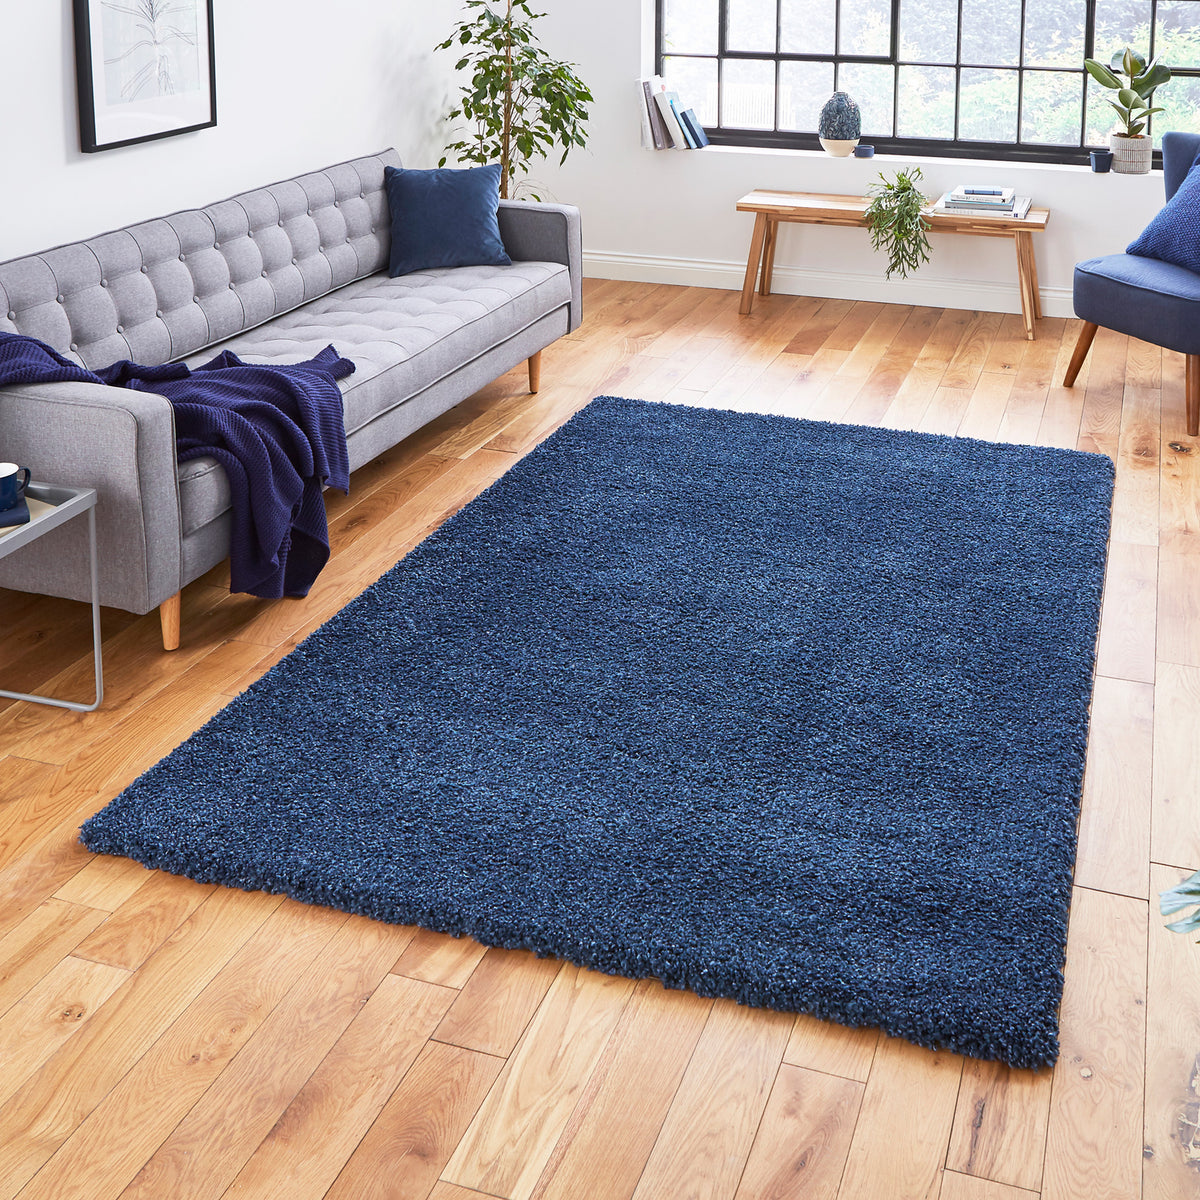 Roswell Dark Blue Stain Resistant Shaggy Rug for living room